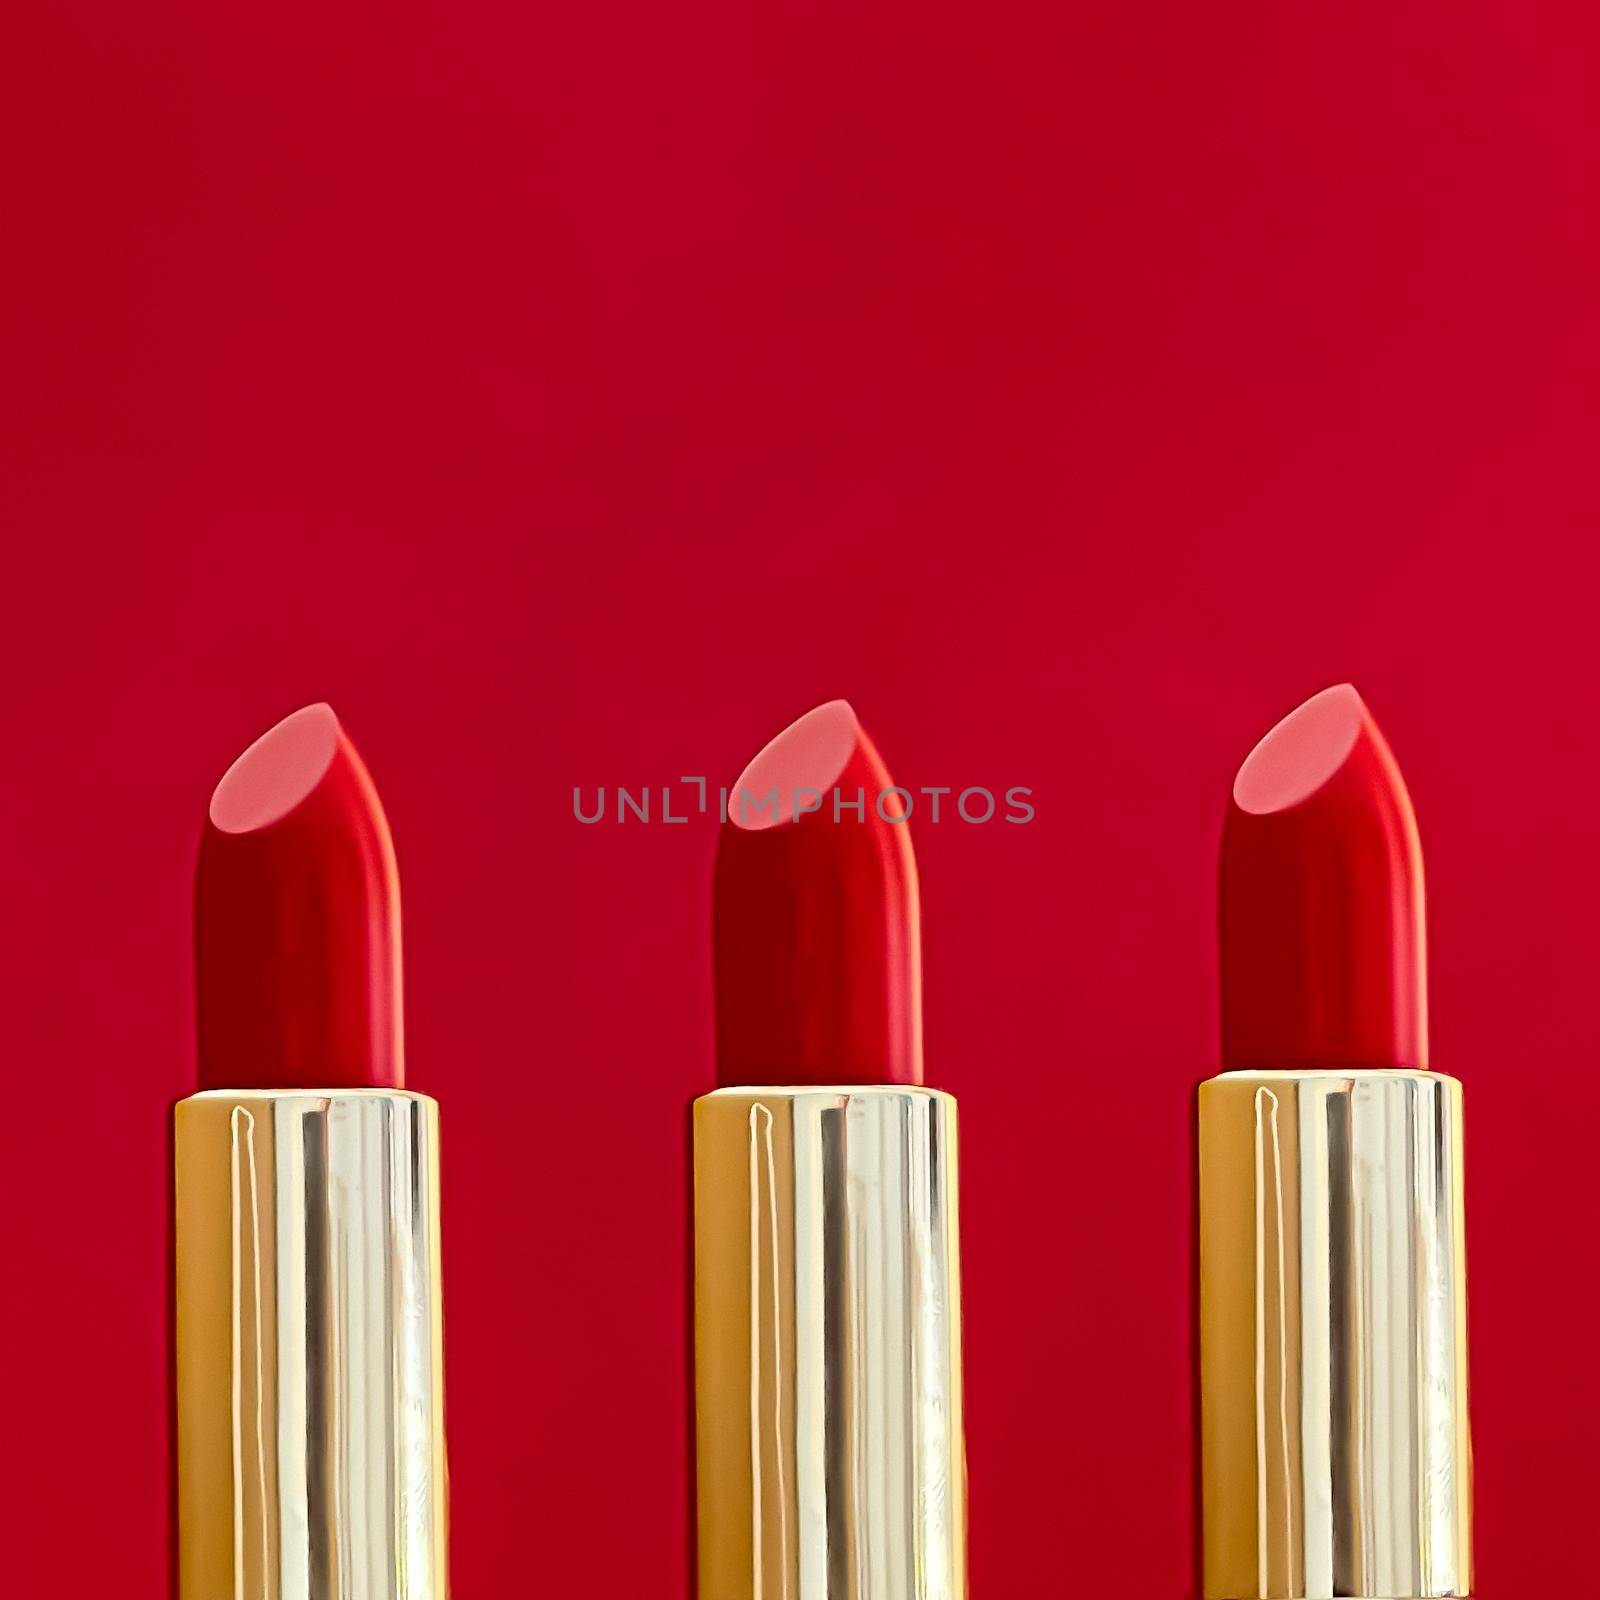 Red lipstick in golden tubes on colour background, luxury make-up and cosmetics for beauty brand product design concept